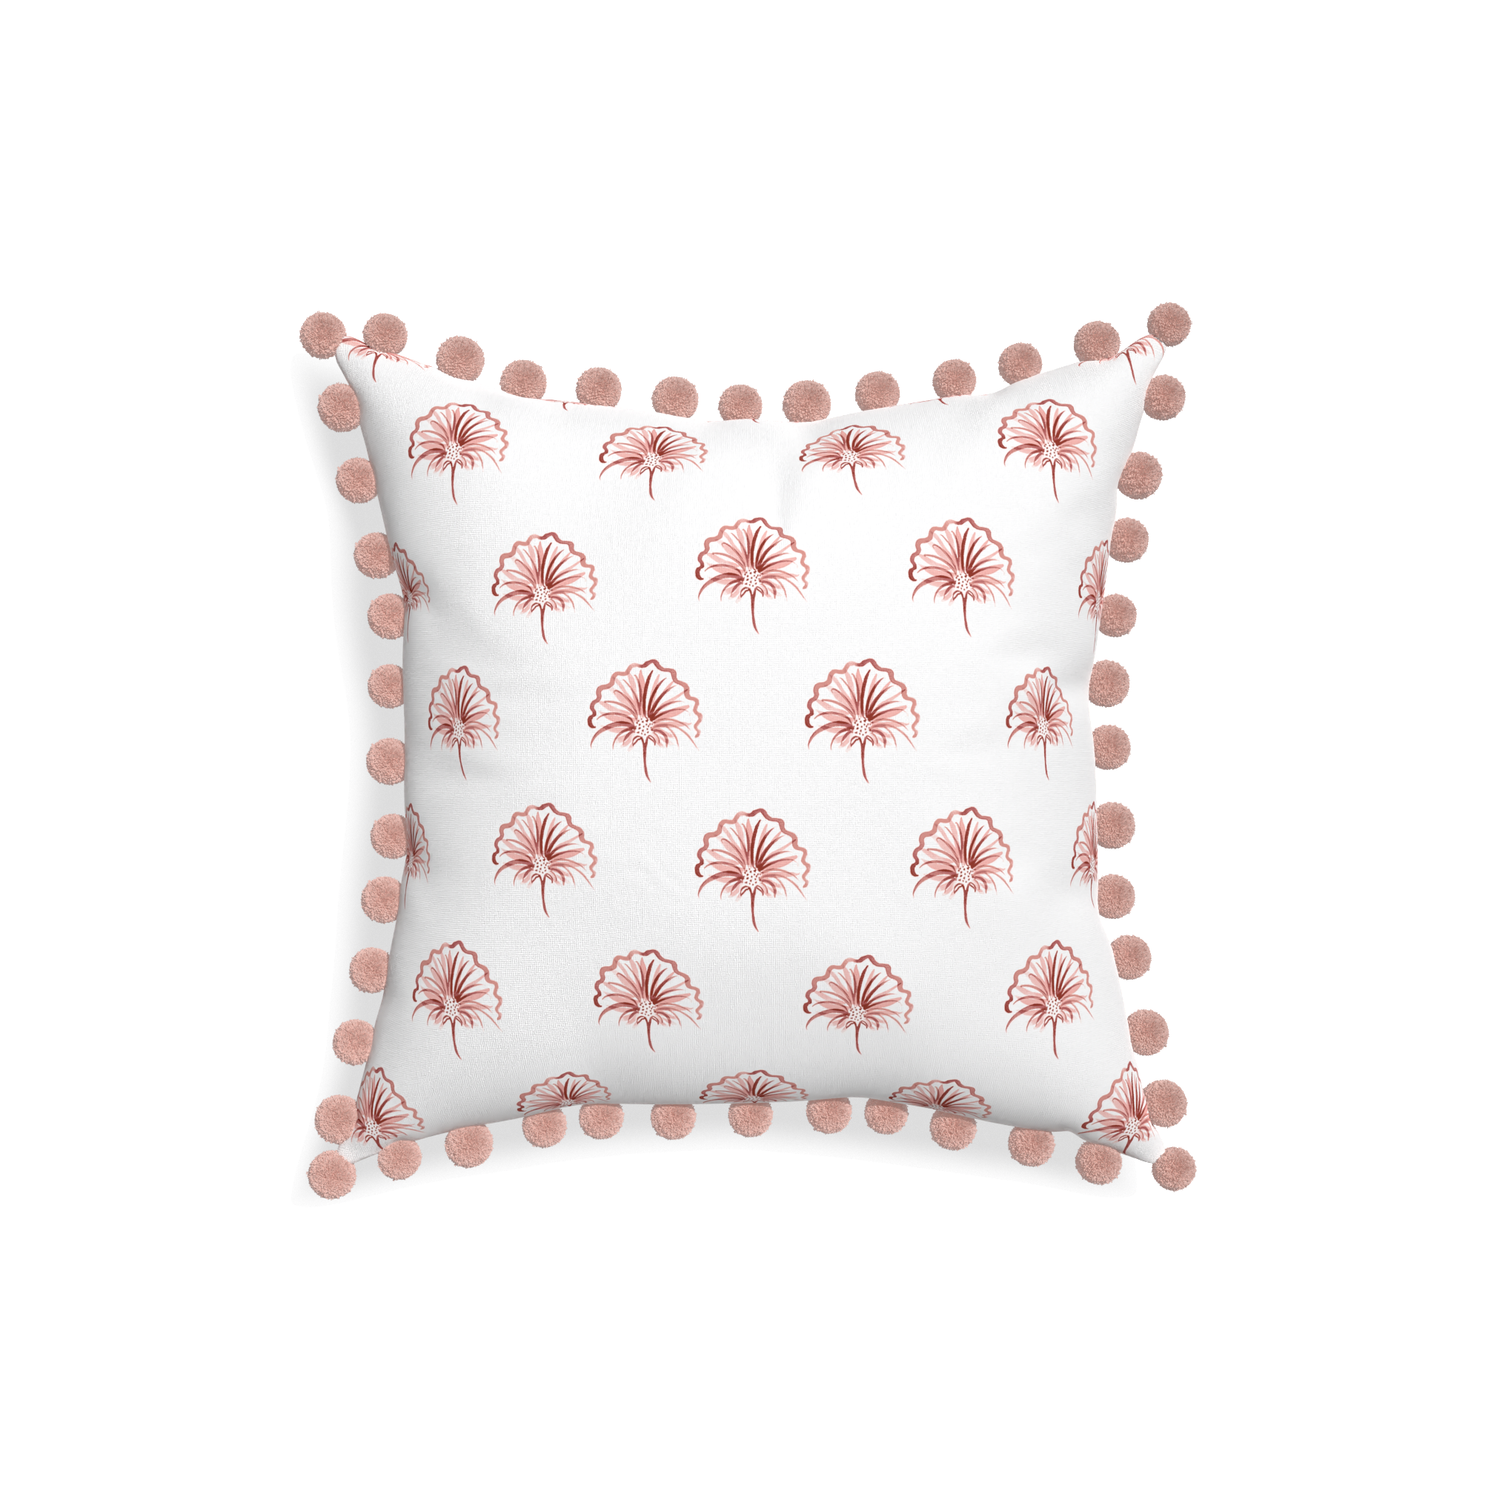 18-square penelope rose custom floral pinkpillow with rose pom pom on white background